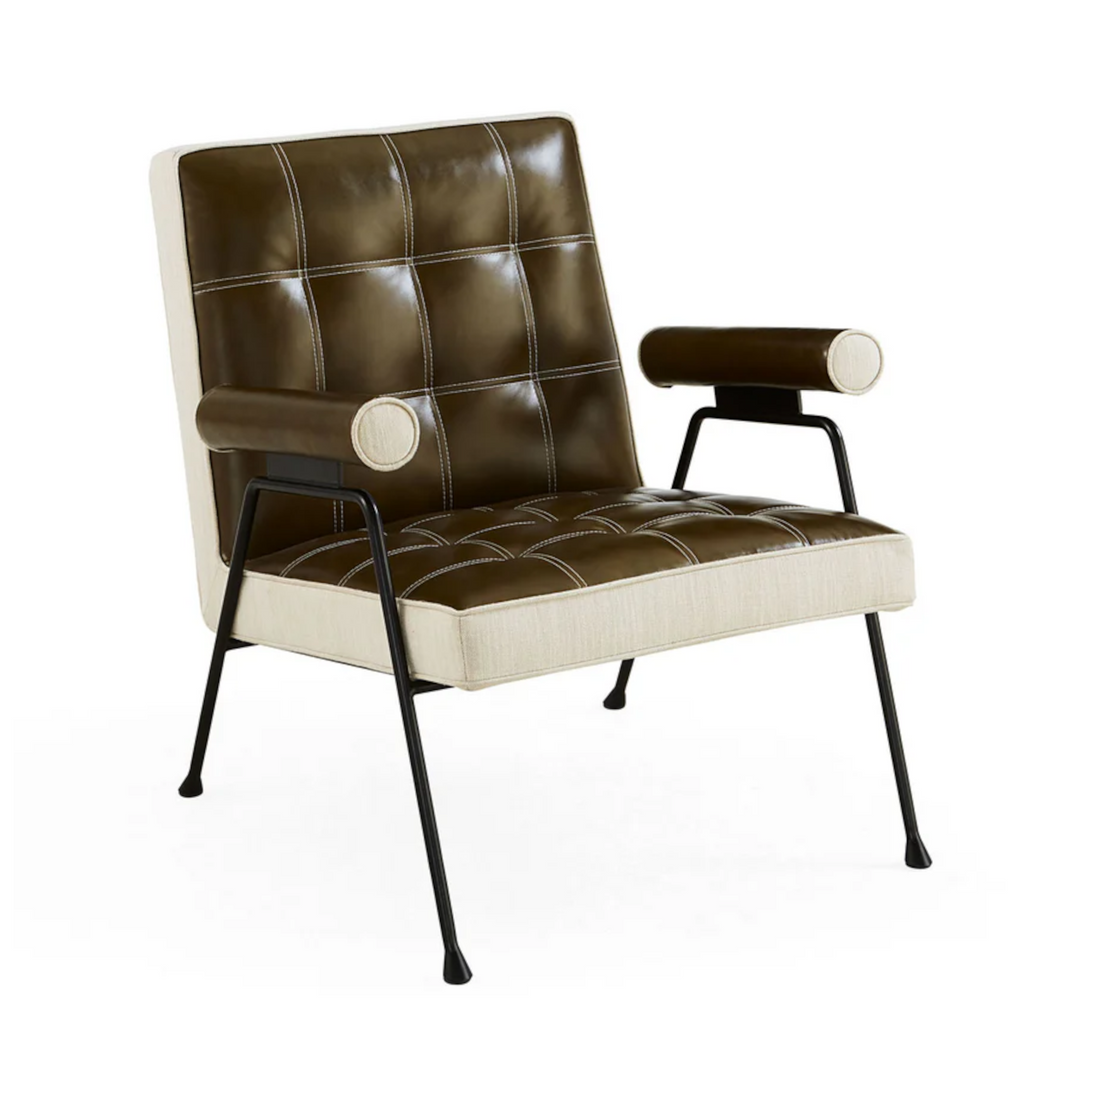 Chair BELMONDO leather upholstered brown